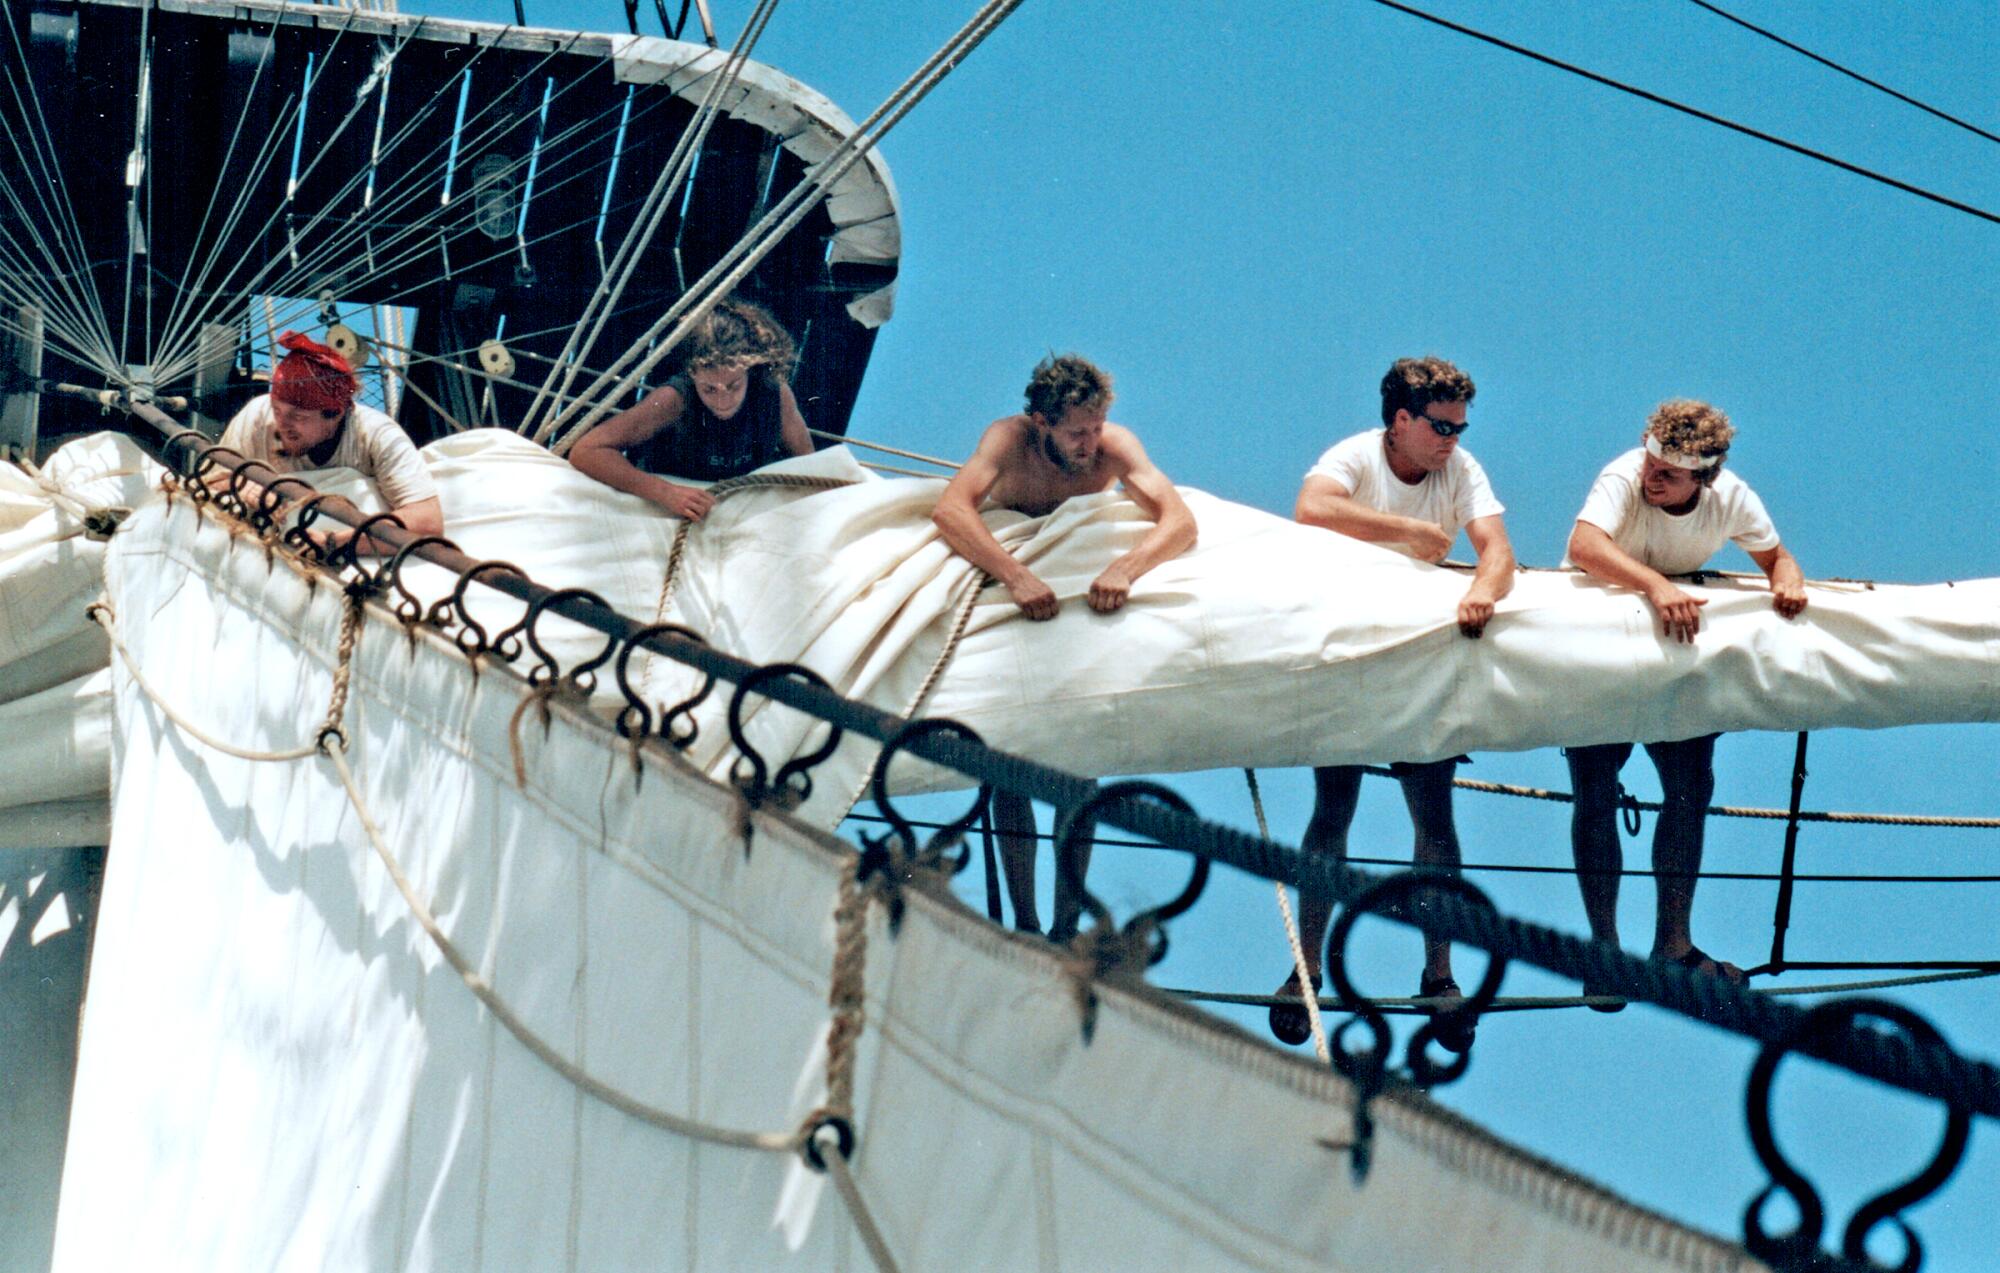 Crew members stand in the tall ship's rigging.